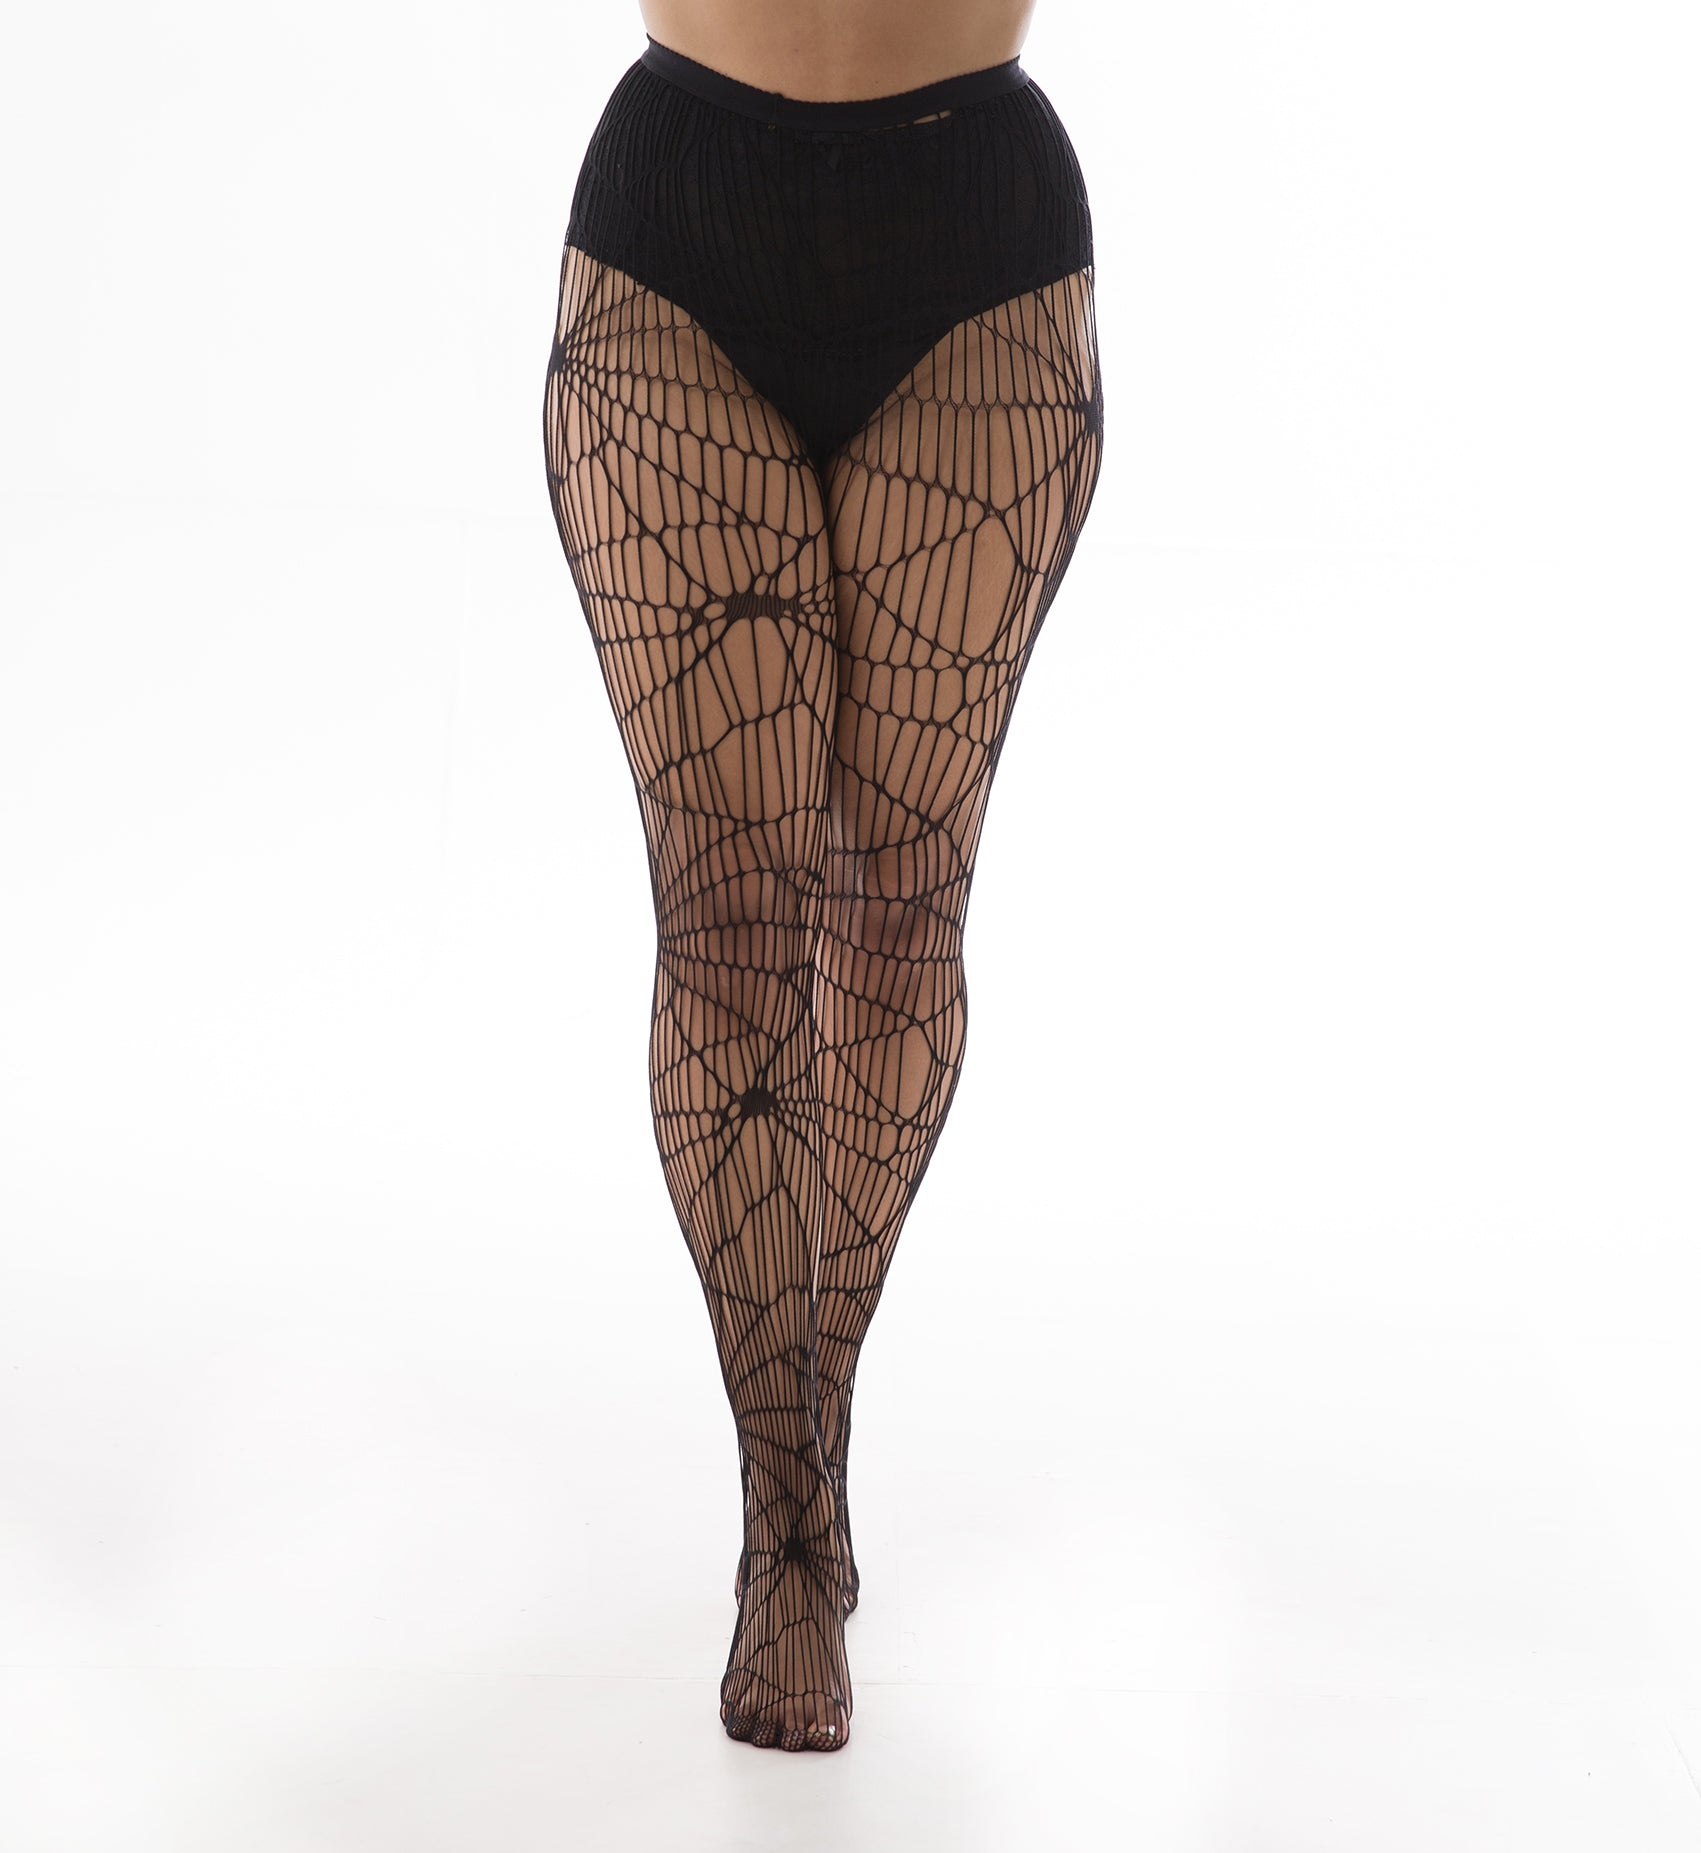 Net Crotchless Tights, Patterned Tights